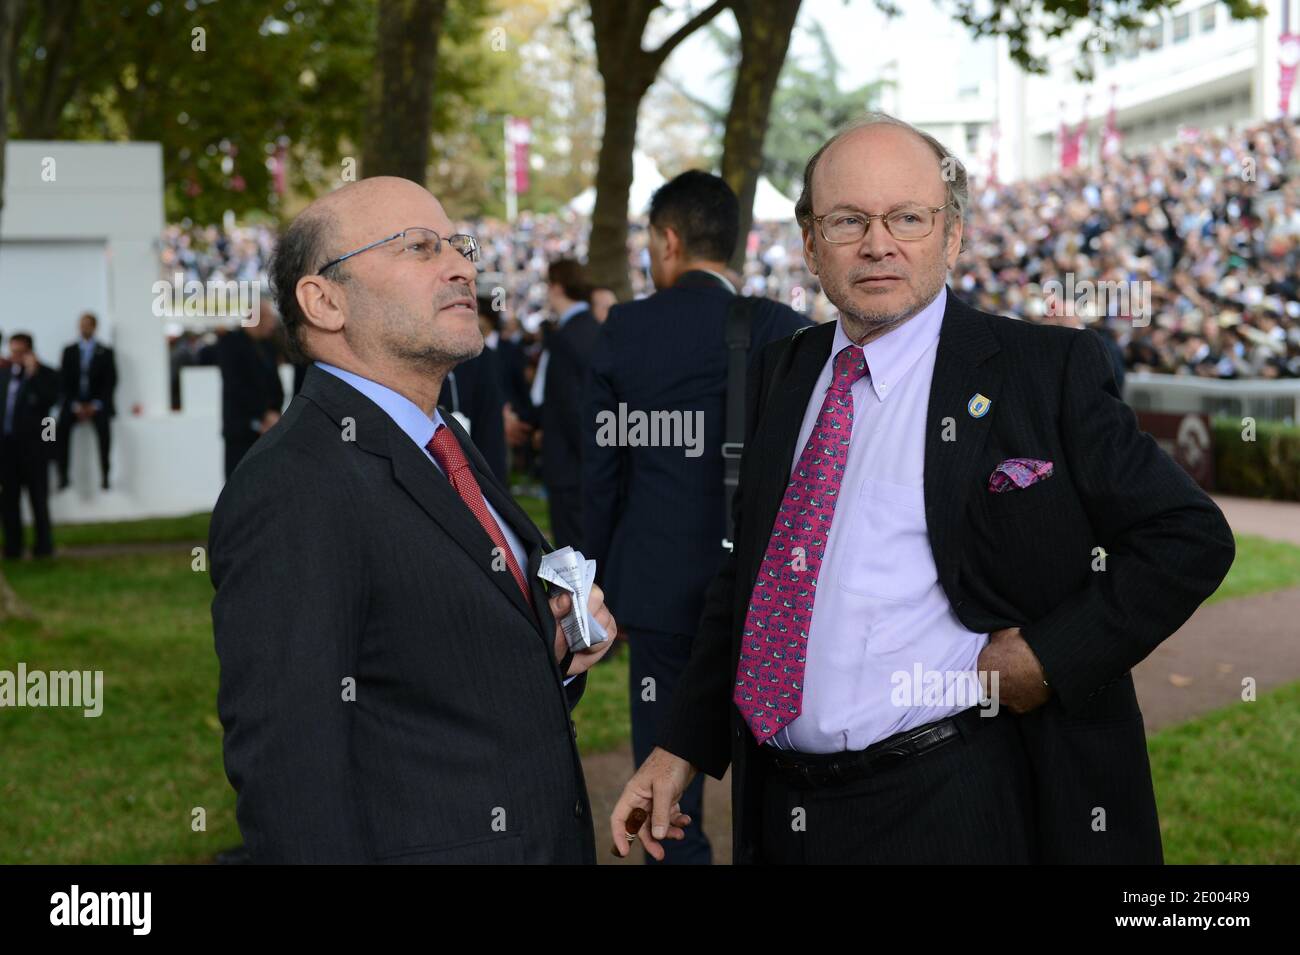 Alain (right) and Gerard Wertheimer (left), owners of Chanel fashion brand,  win one of the races with the horse 'Indonesienne' prior to Qatar Prix de  l'Arc de Triomphe held at Longchamp racecourse,